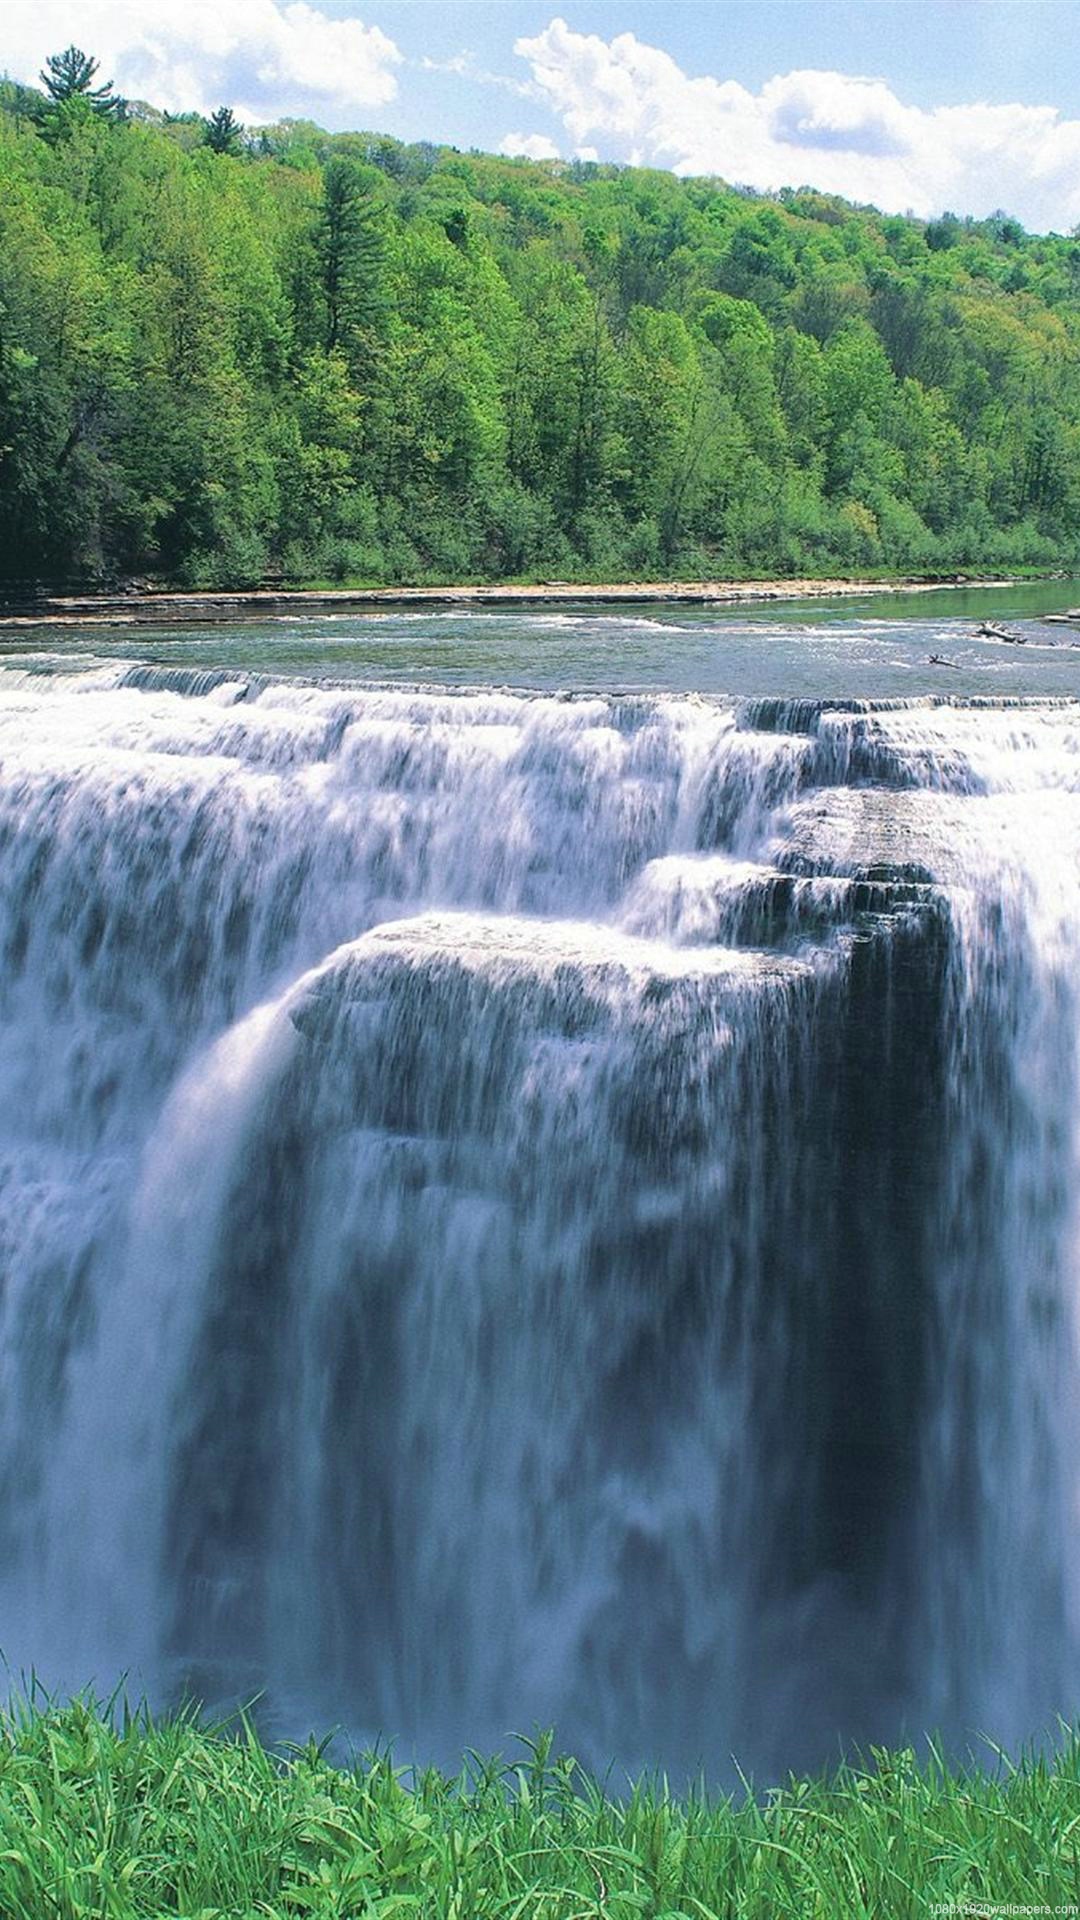 Waterfall New York Nature Park Wallpapers Hd - Letchworth State Park - HD Wallpaper 